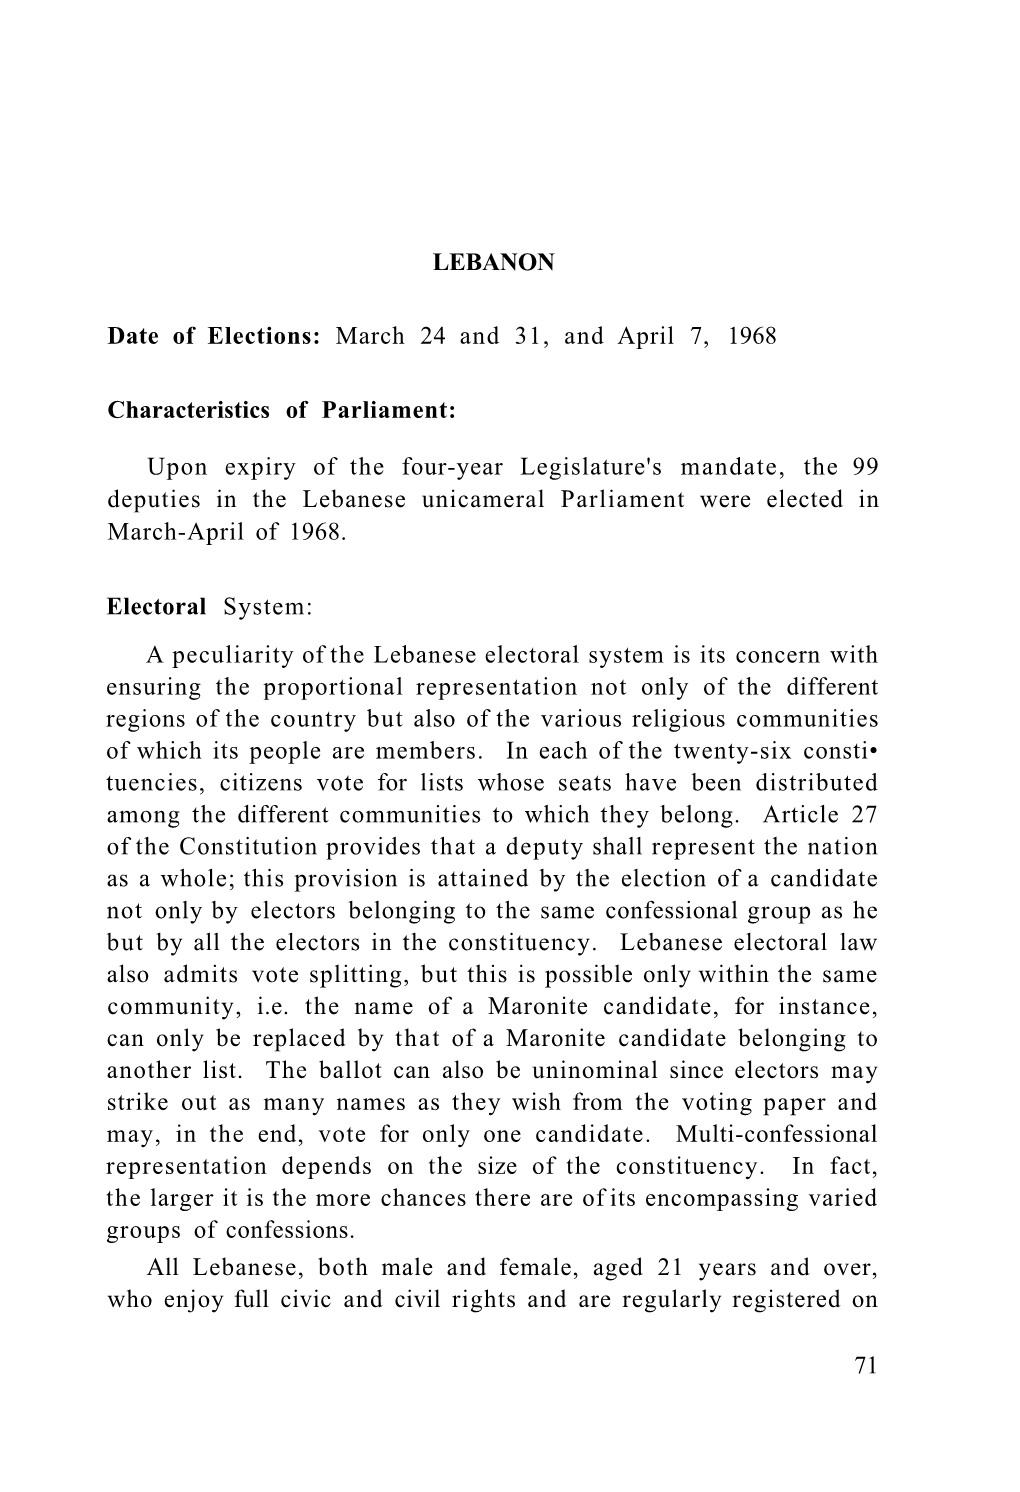 LEBANON Date of Elections: March 24 and 31, and April 7, 1968